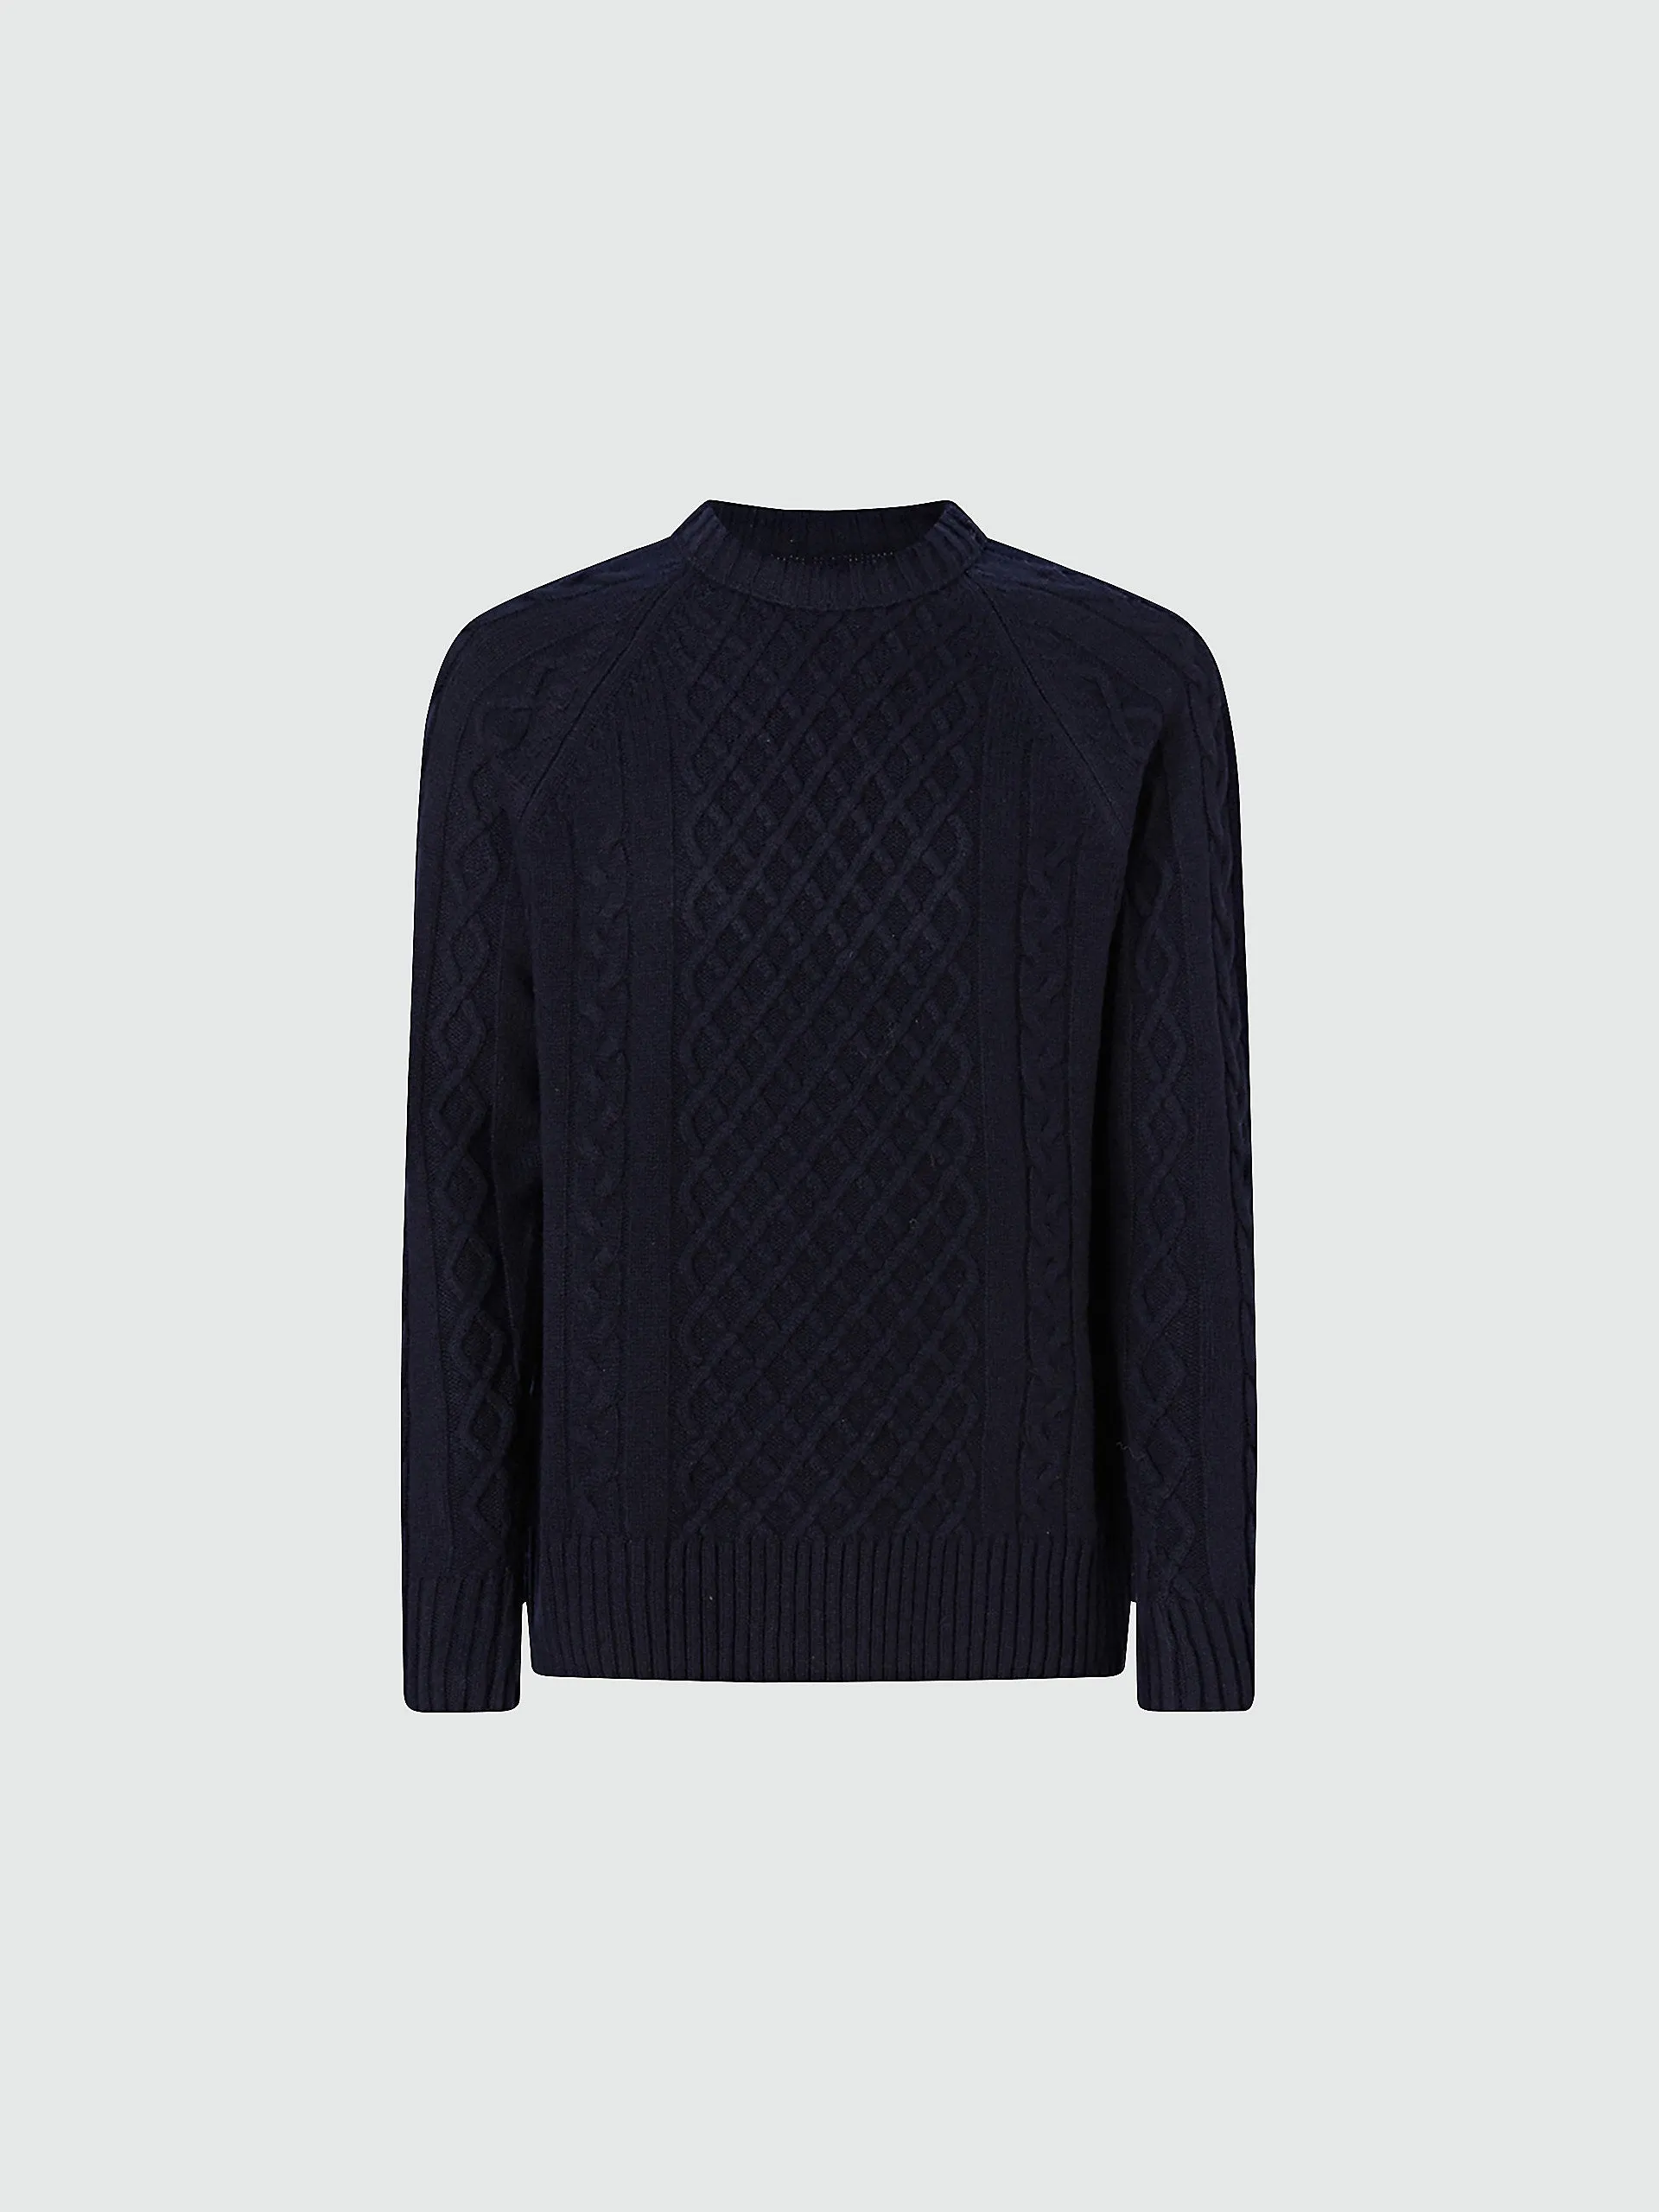  - Cable-knit jumperNavy blueS